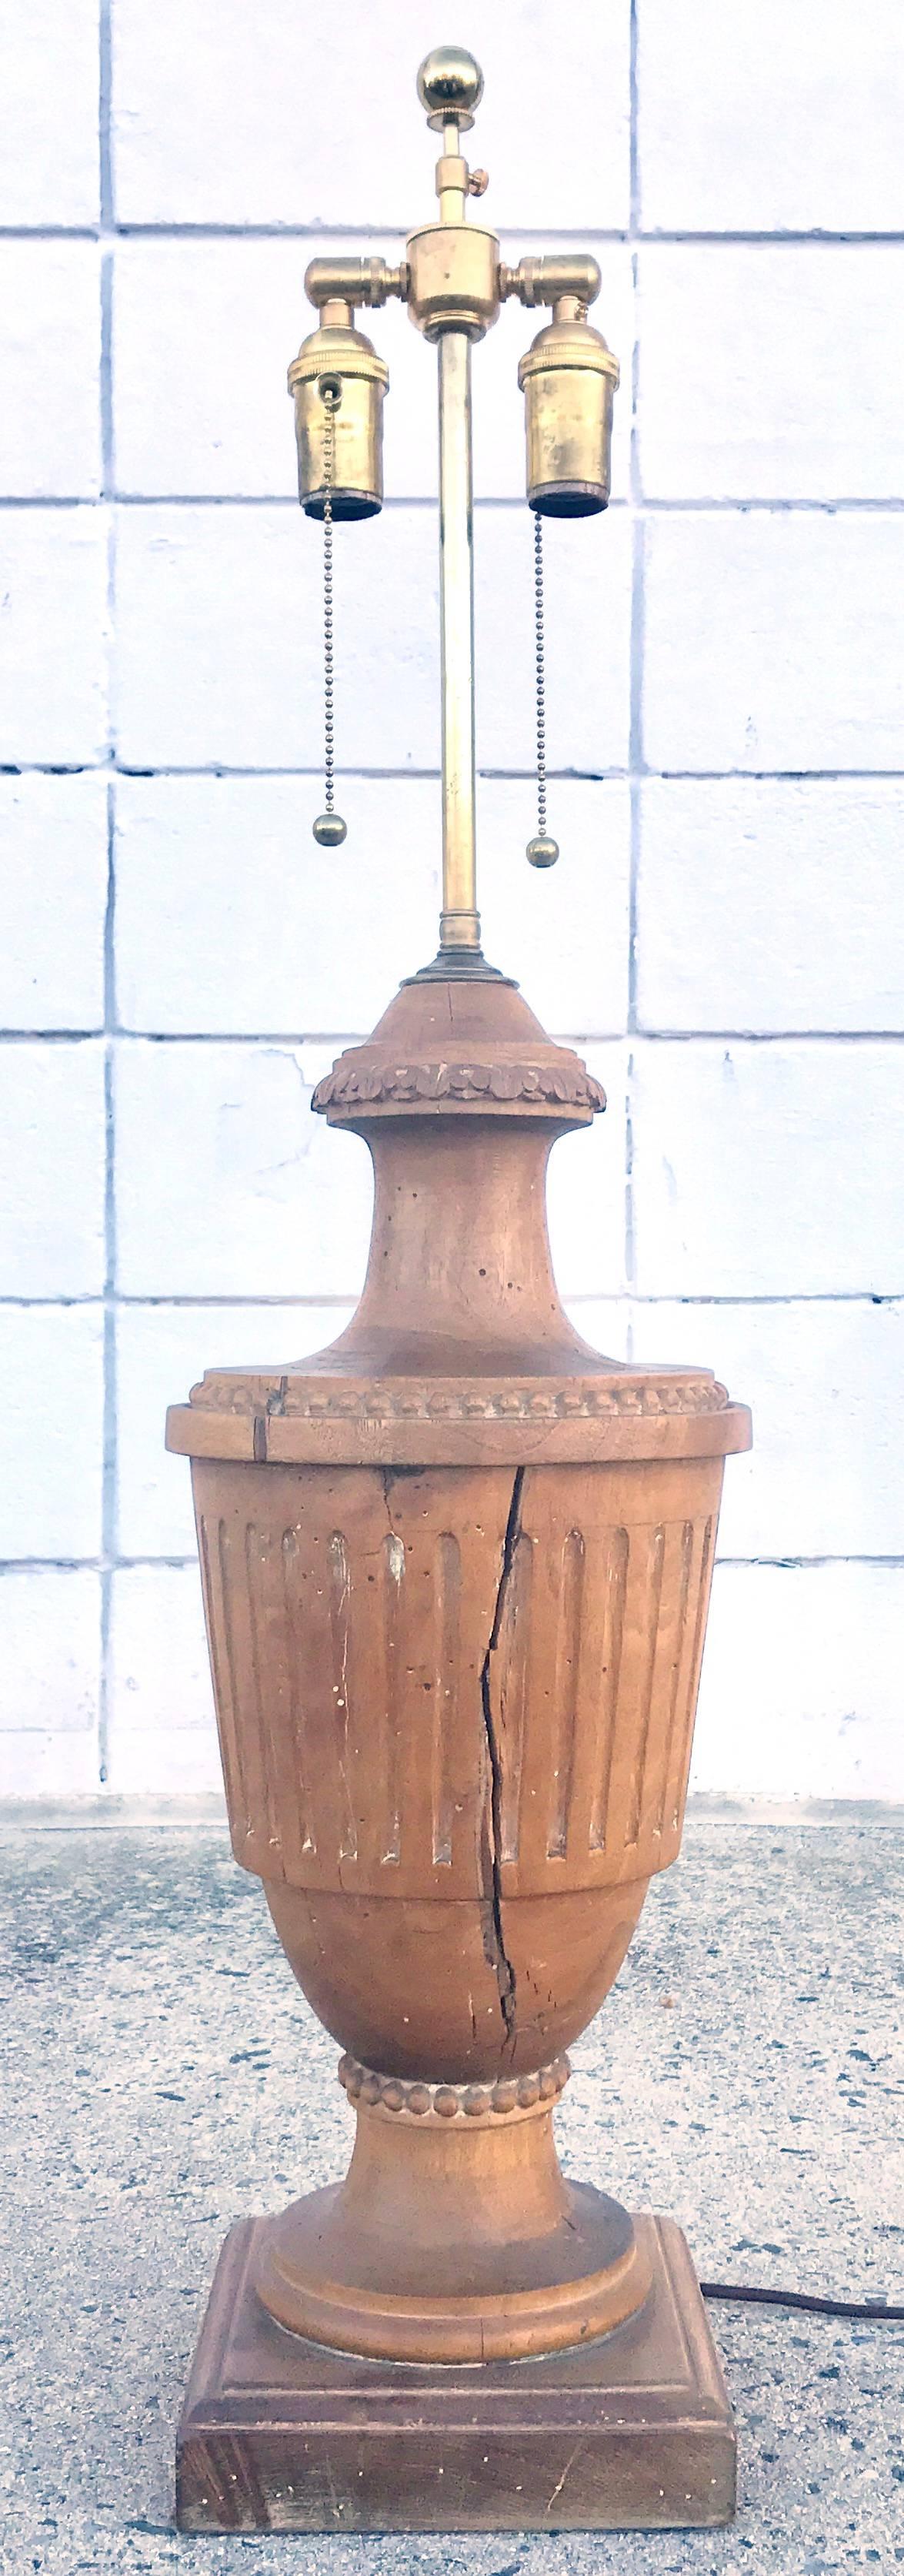 Fabulous large-scale 18th century Italian carved walnut urn from an architectural setting, mounted as a lamp in the 1940s by famed long island interior design firm, Lincoln Interiors. This lamp has acquired a gorgeous rich patina with time, and has